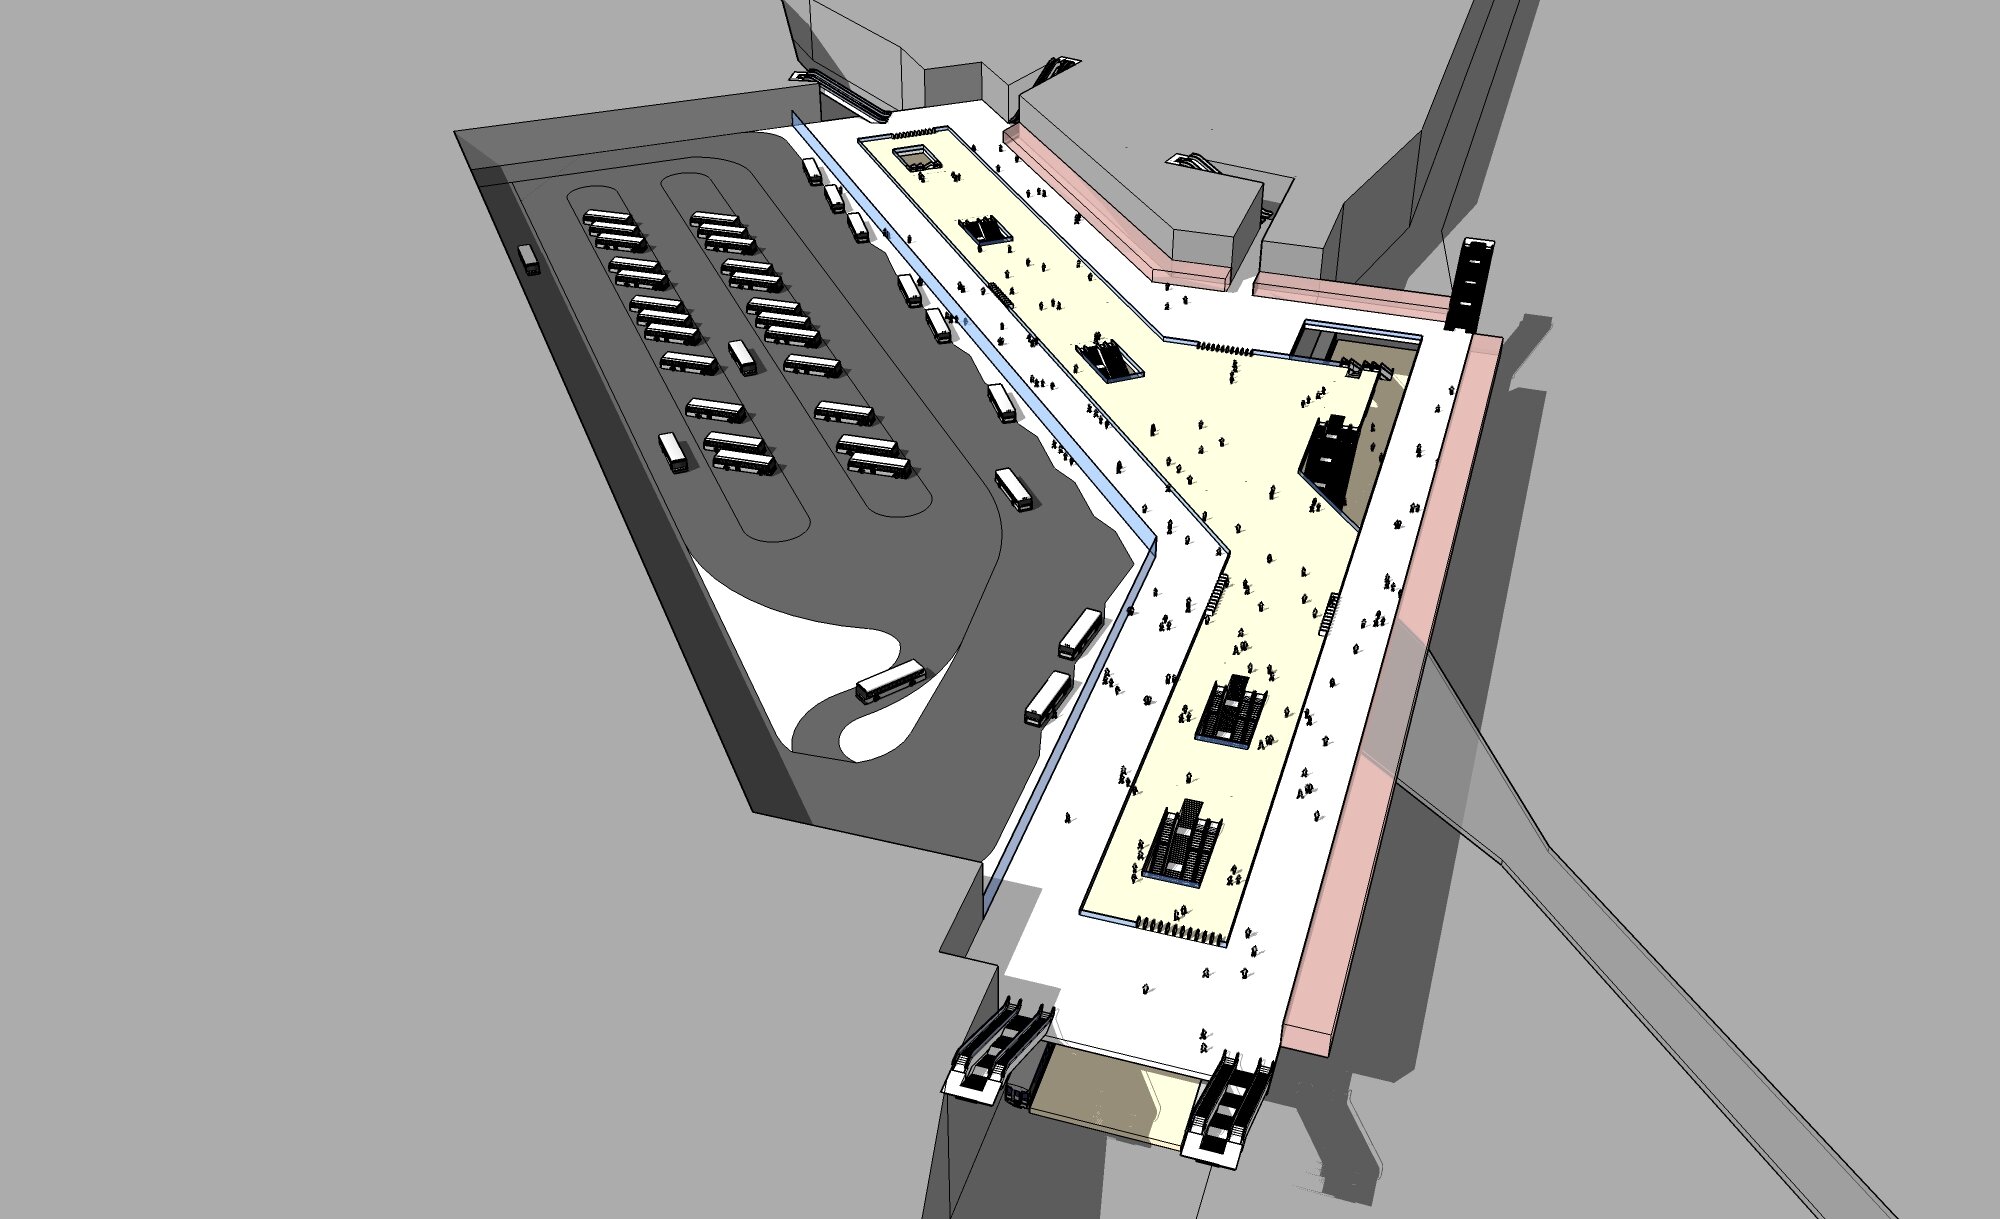 View of the 3D model of one of the concepts developed for the transport hub